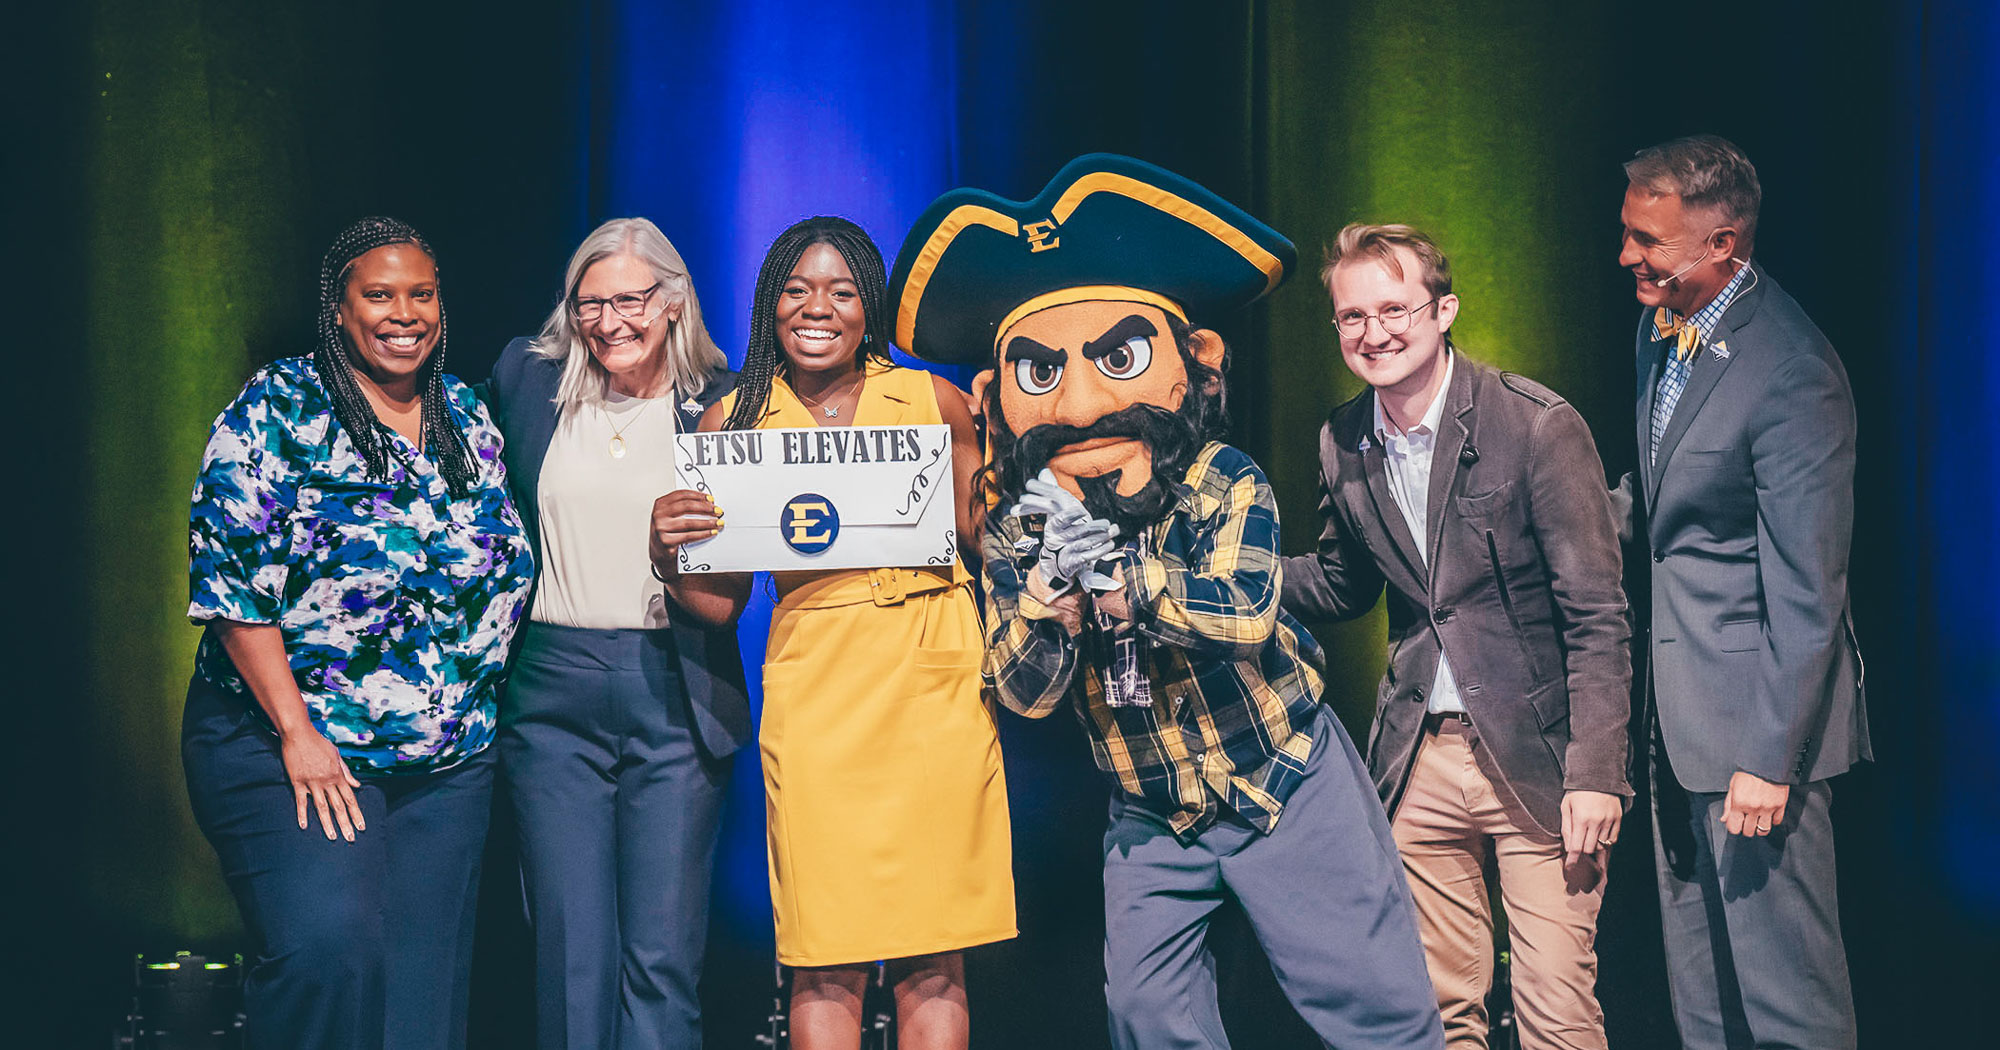 Sarah Mohammed receives award for winning ETSU Elevates pitch competition